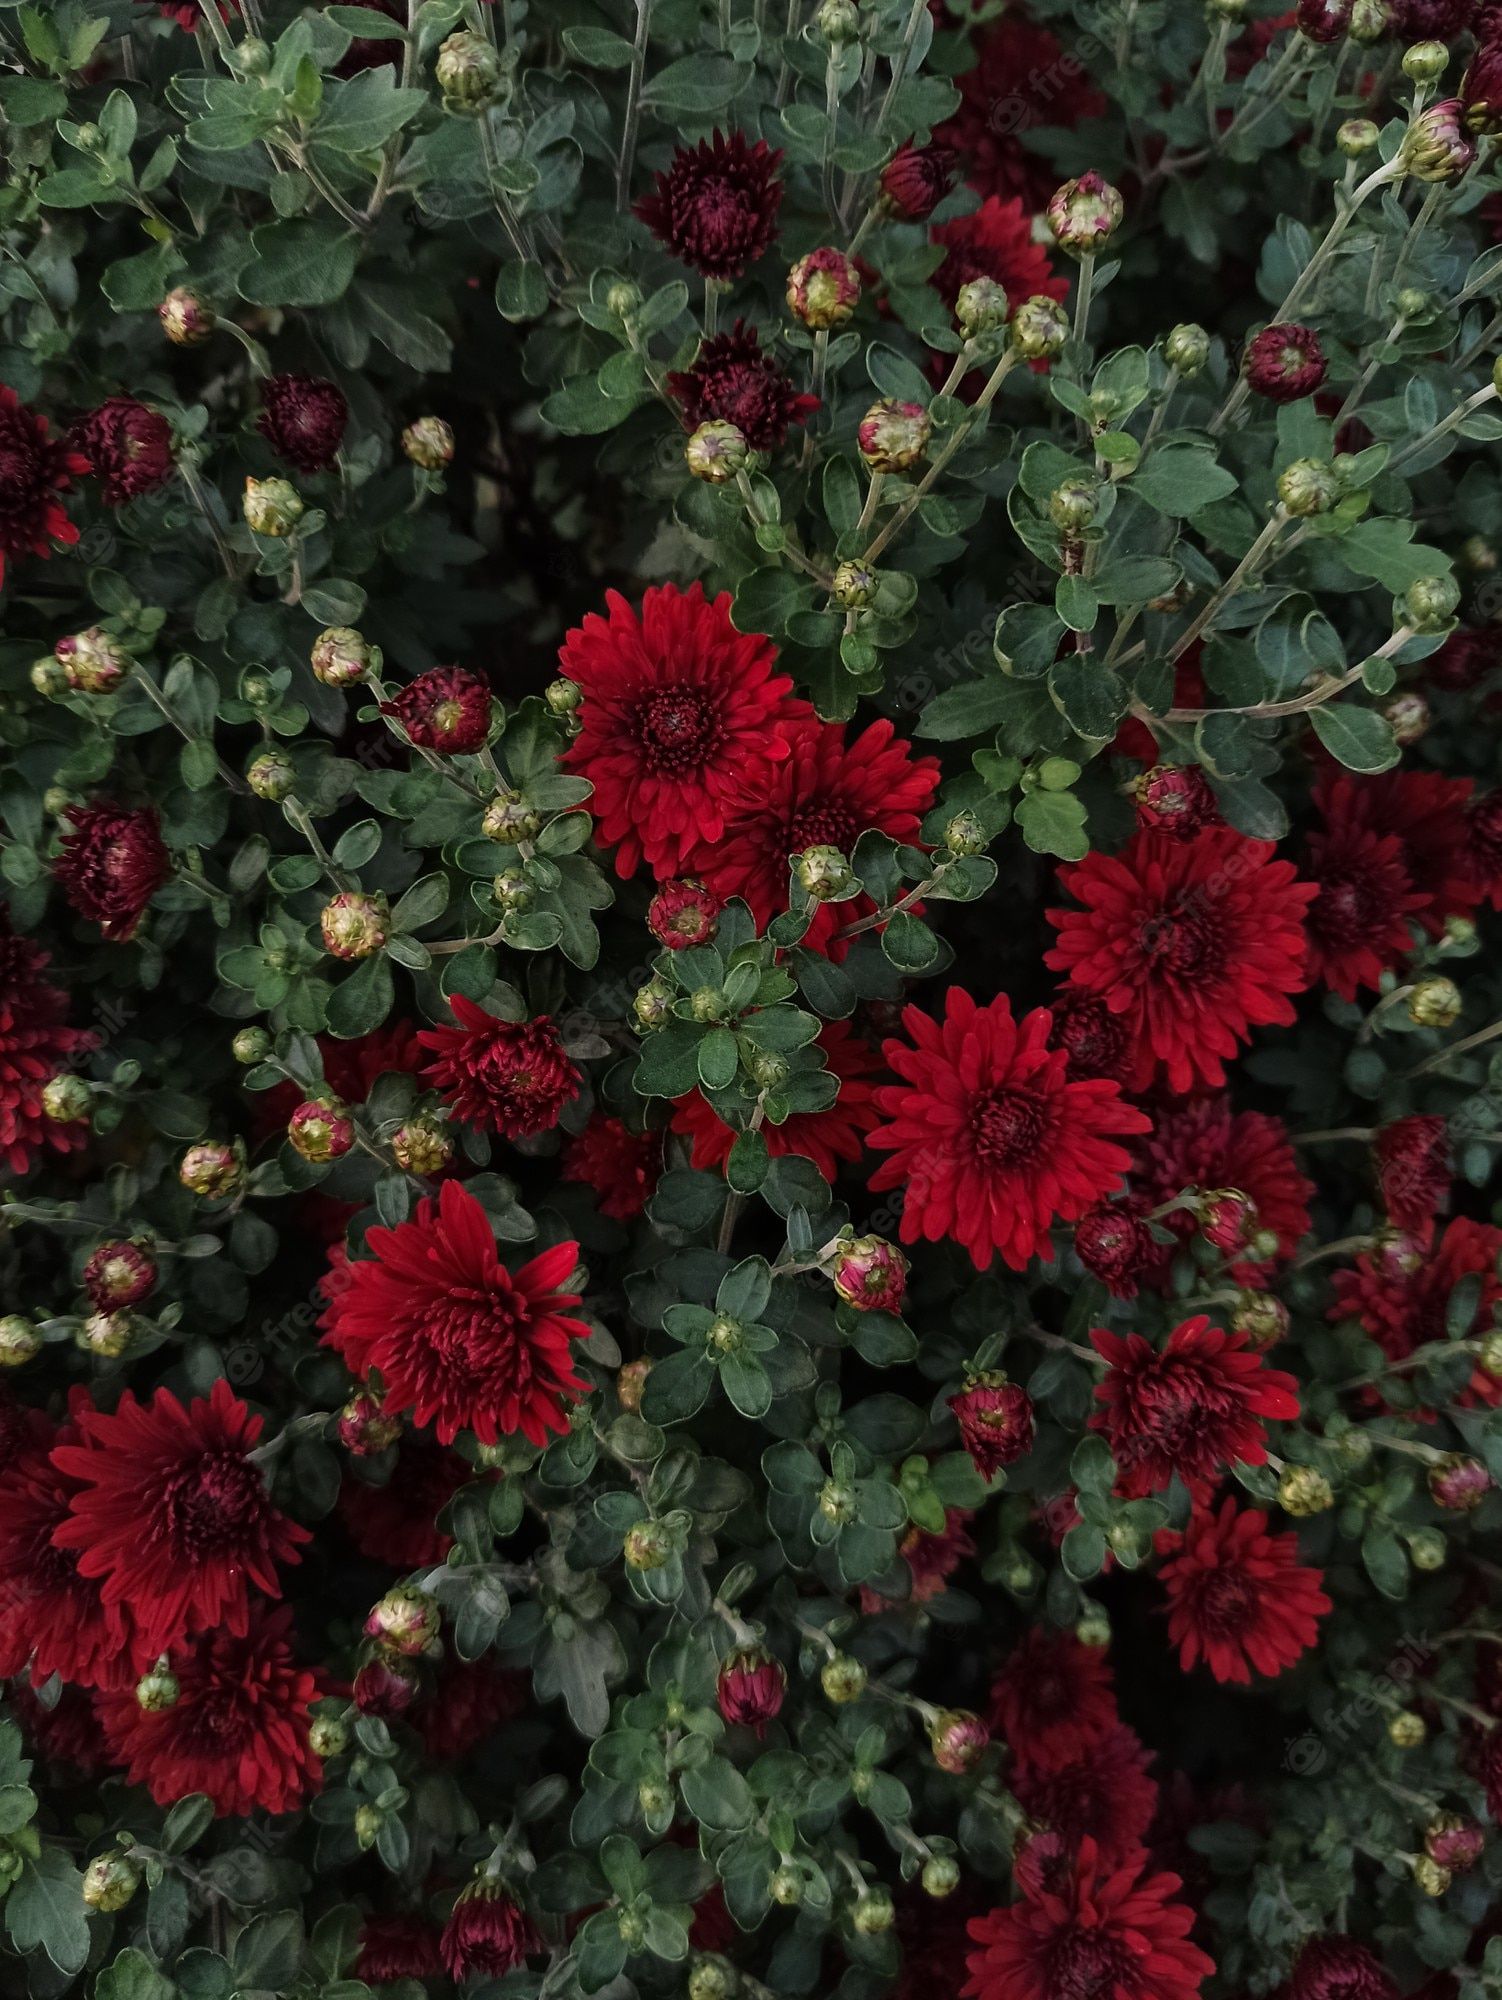 A close up of some red flowers - Garden